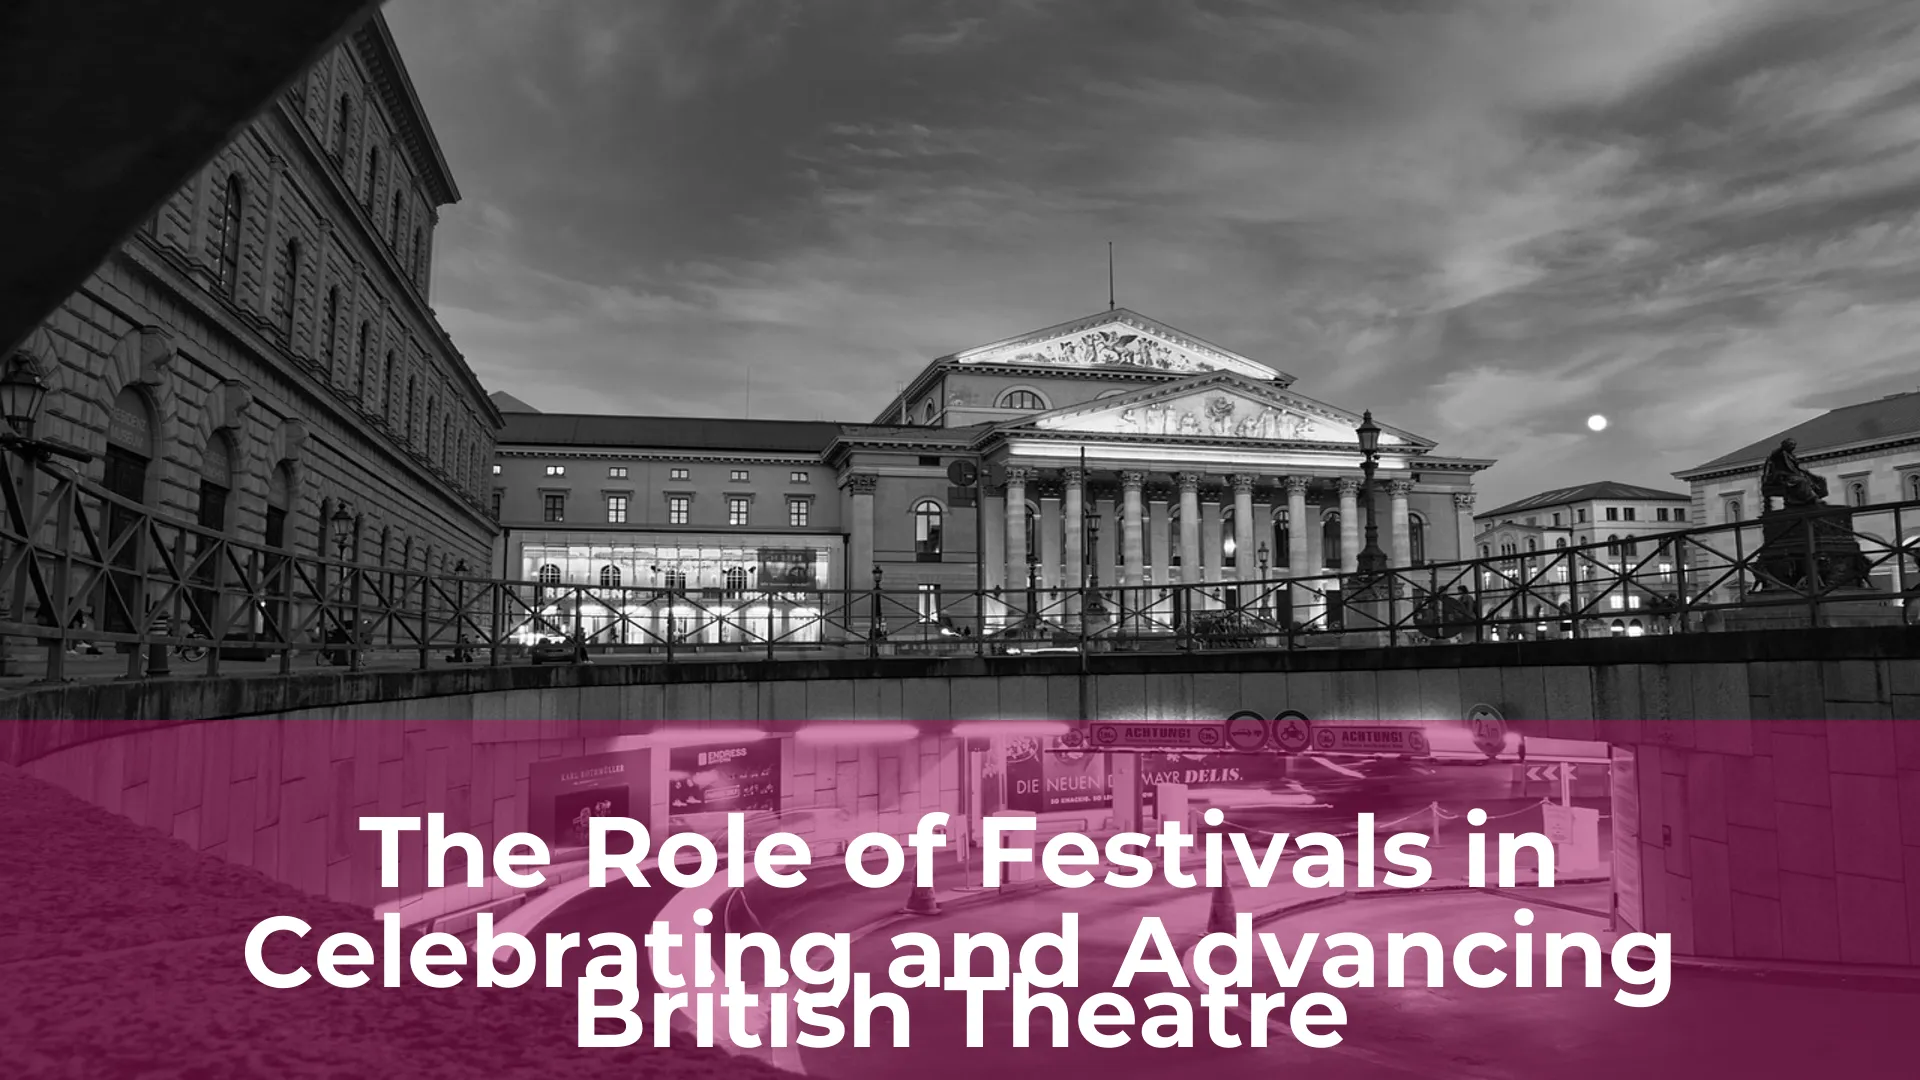 The role of festivals in celebrating and advancing british theatre